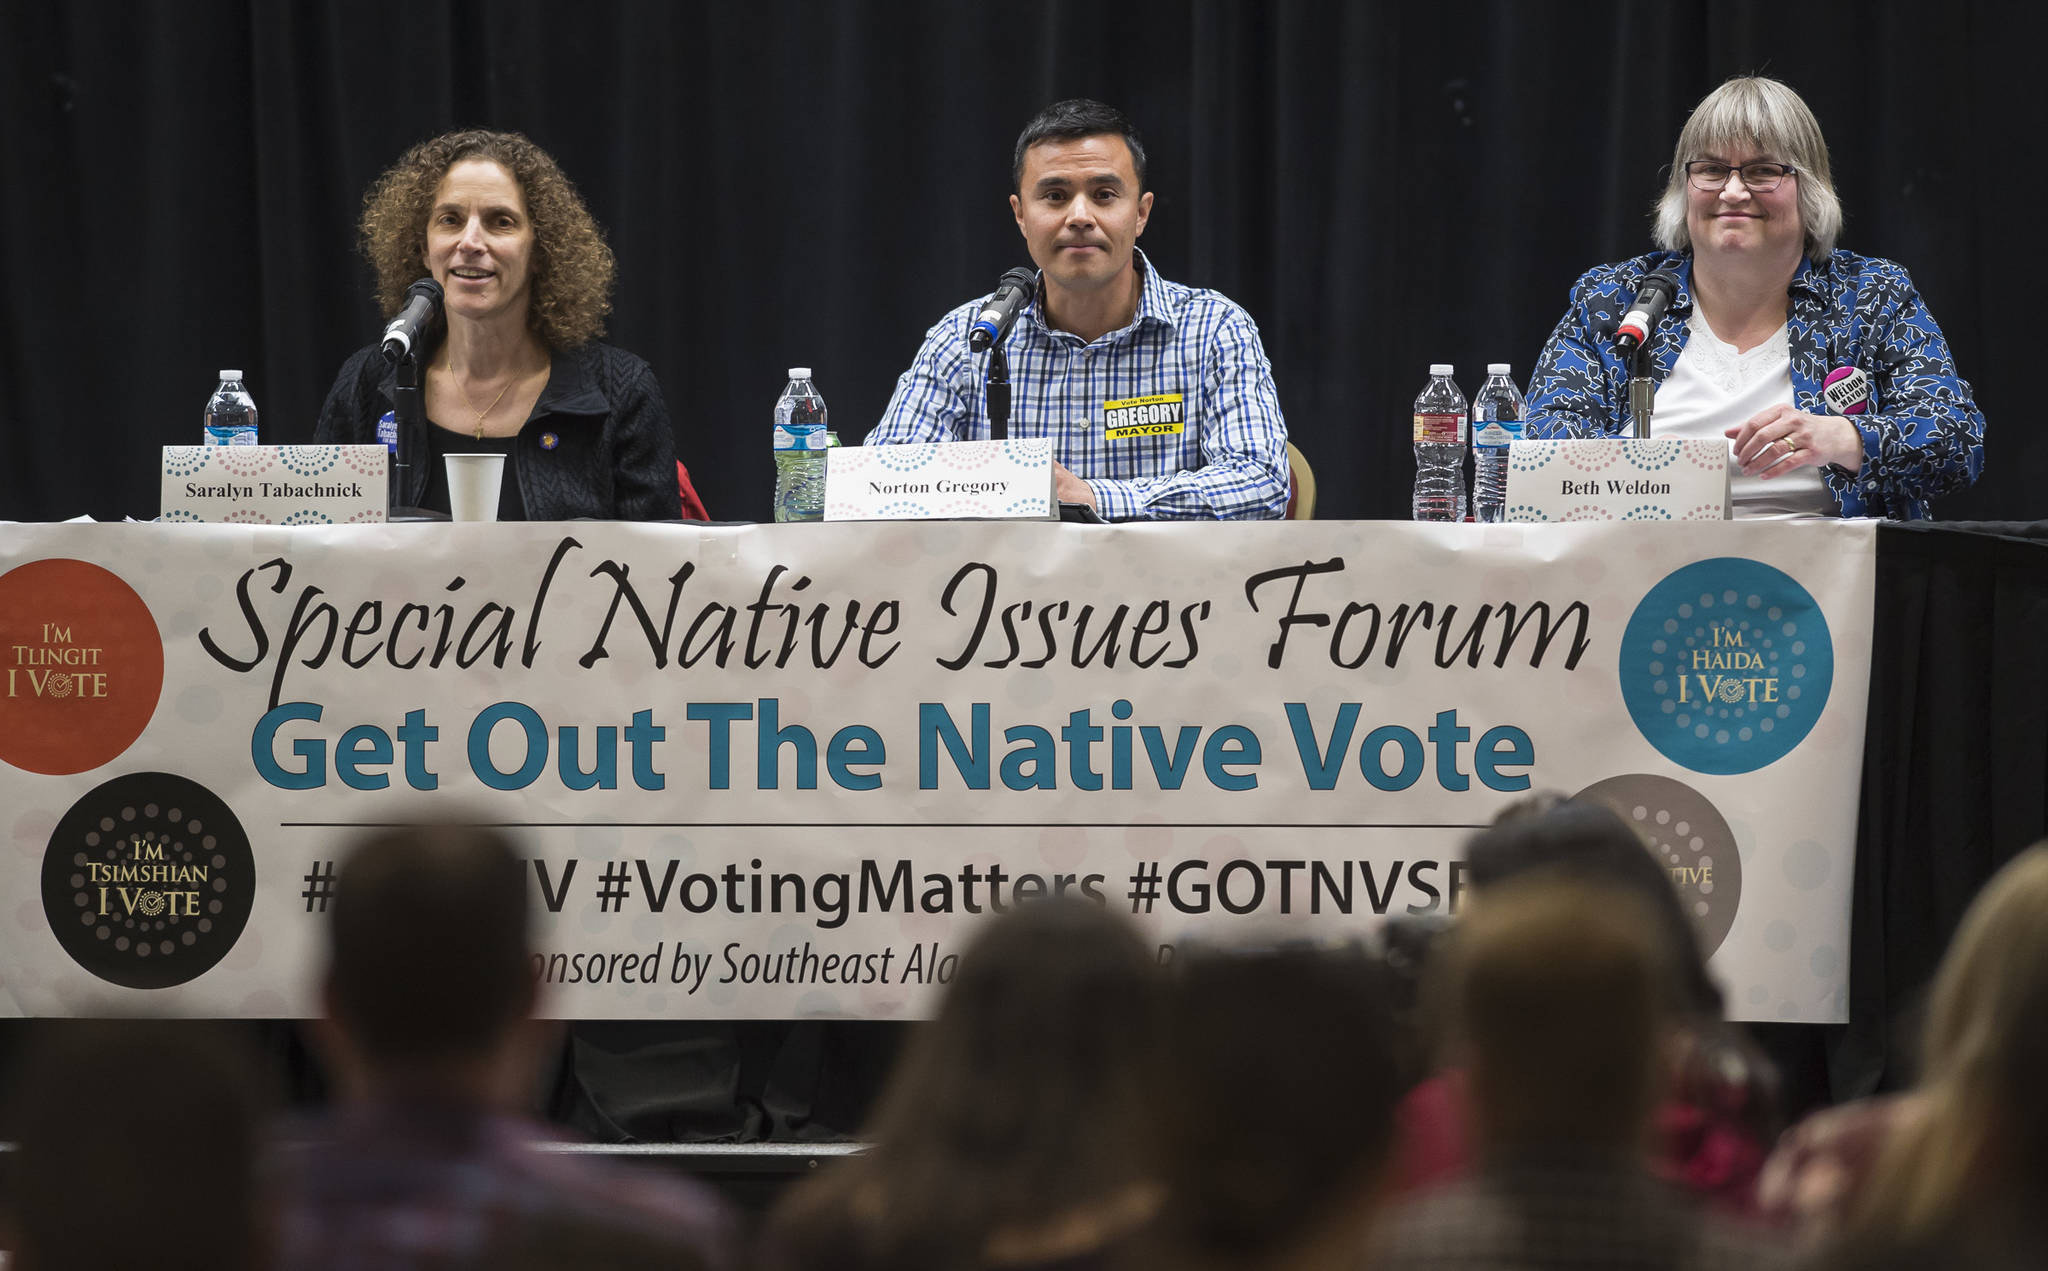 Mayoral candidates Saralyn Tabachnick, left, Gregory Norton, center, and Beth Weldon answers questions during a Special Native Issues Forum at the Elizabeth Peratrovich Hall on Tuesday, Sept. 18, 2018. (Michael Penn | Juneau Empire)